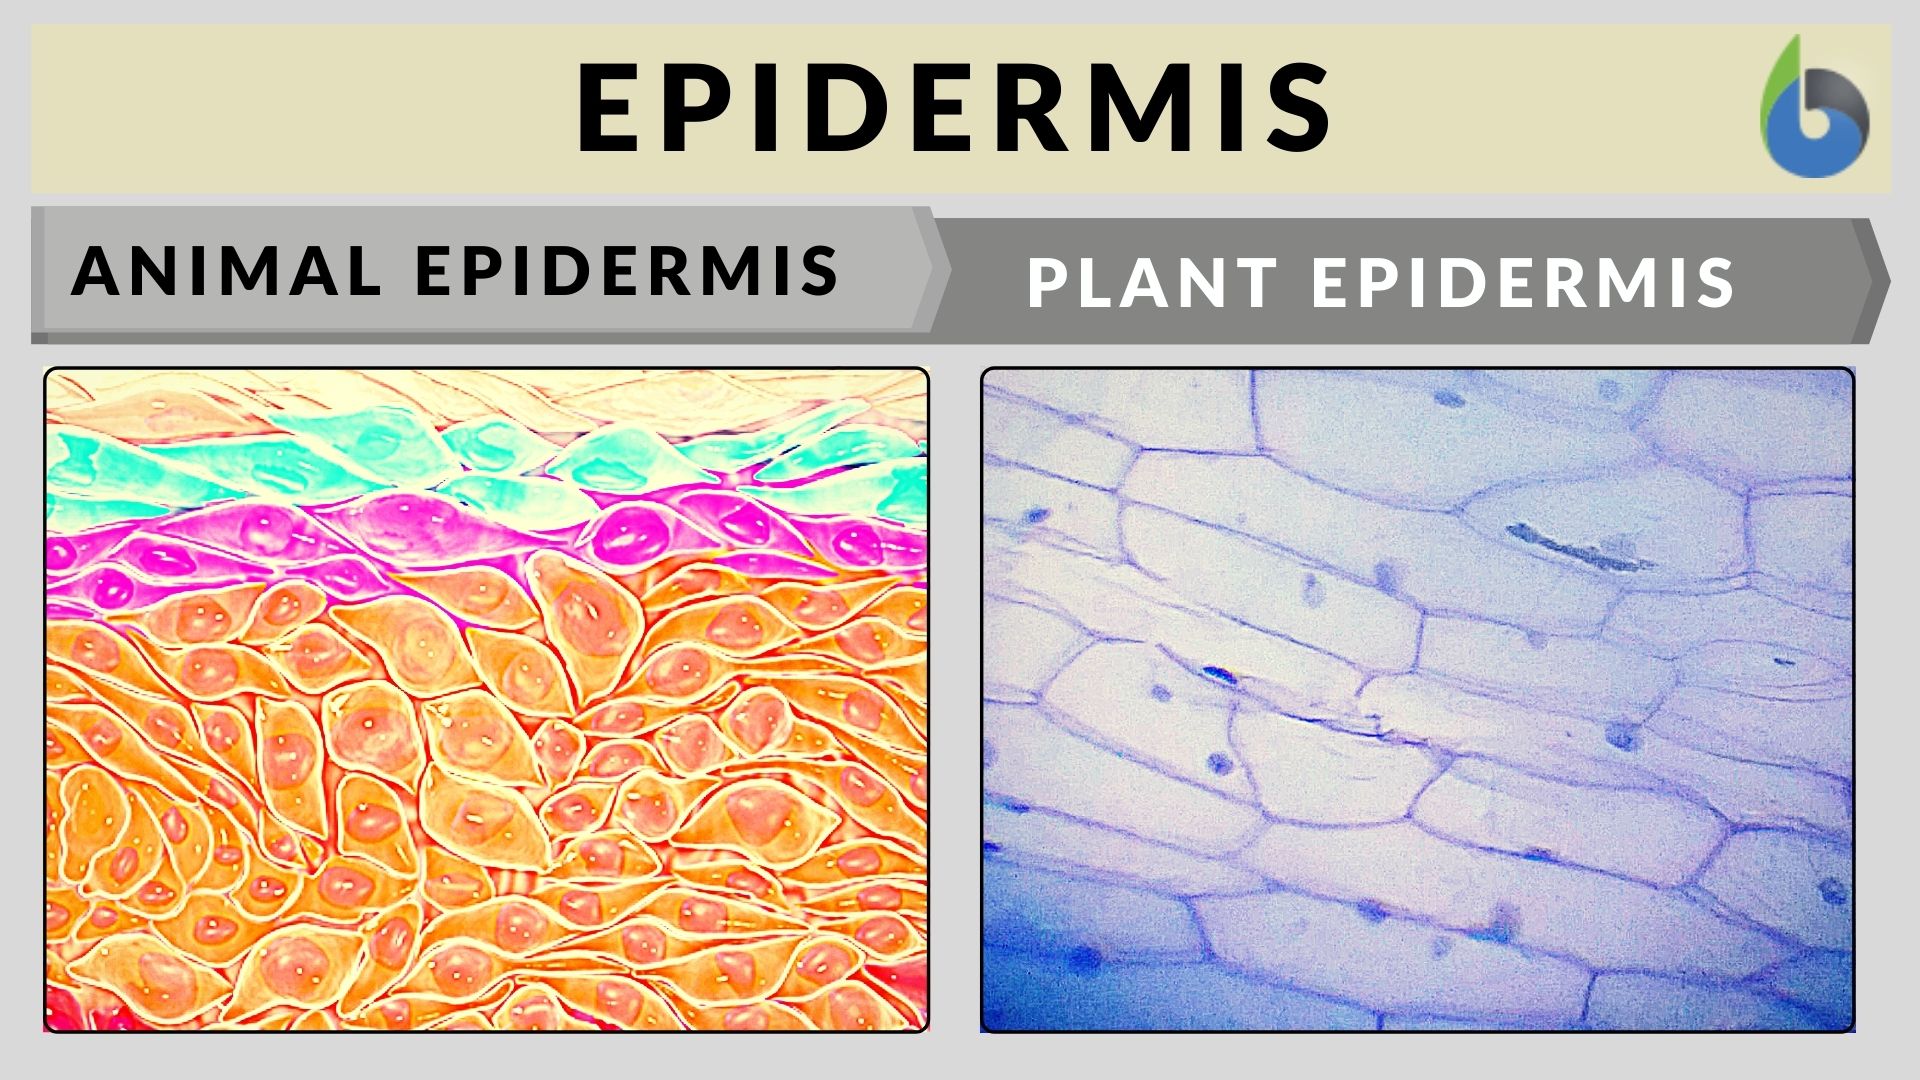 Epidermis - Definition and Examples - Biology Online Dictionary